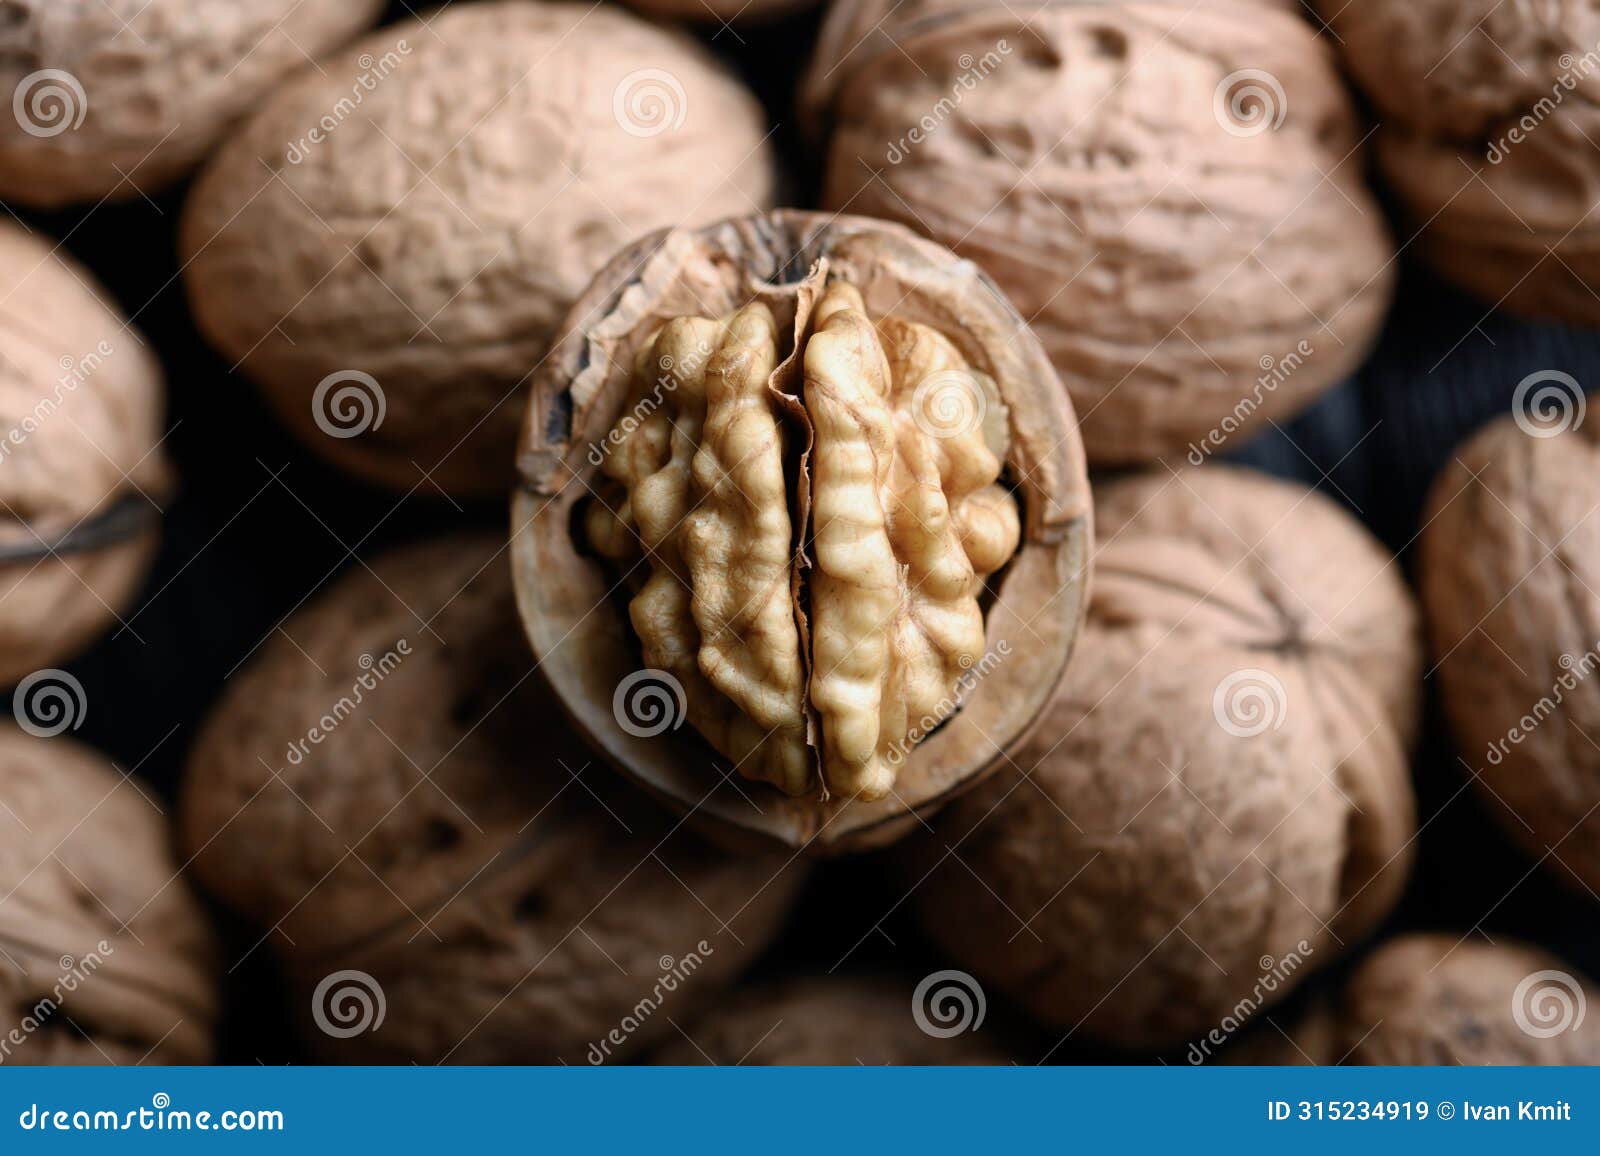 cracked walnut with kernels on heap of whole walnuts